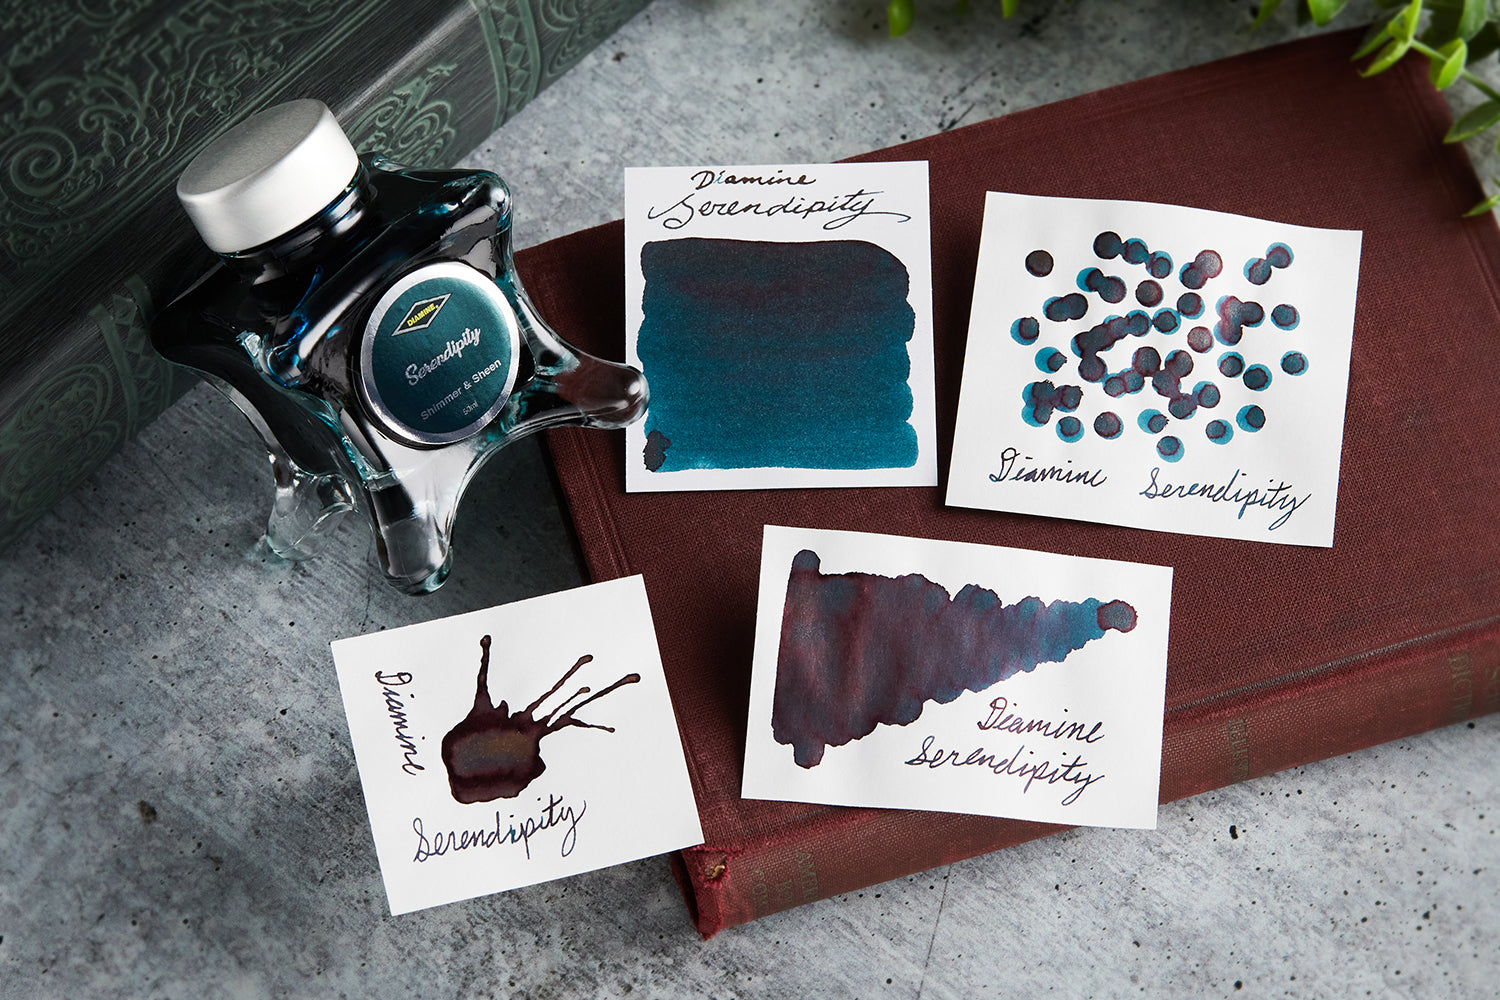 Diamine Serendipity fountain pen ink bottle along with 4 white cards that have ink swabs, splatters, or dots, all resting on a brown notebook with a gray background